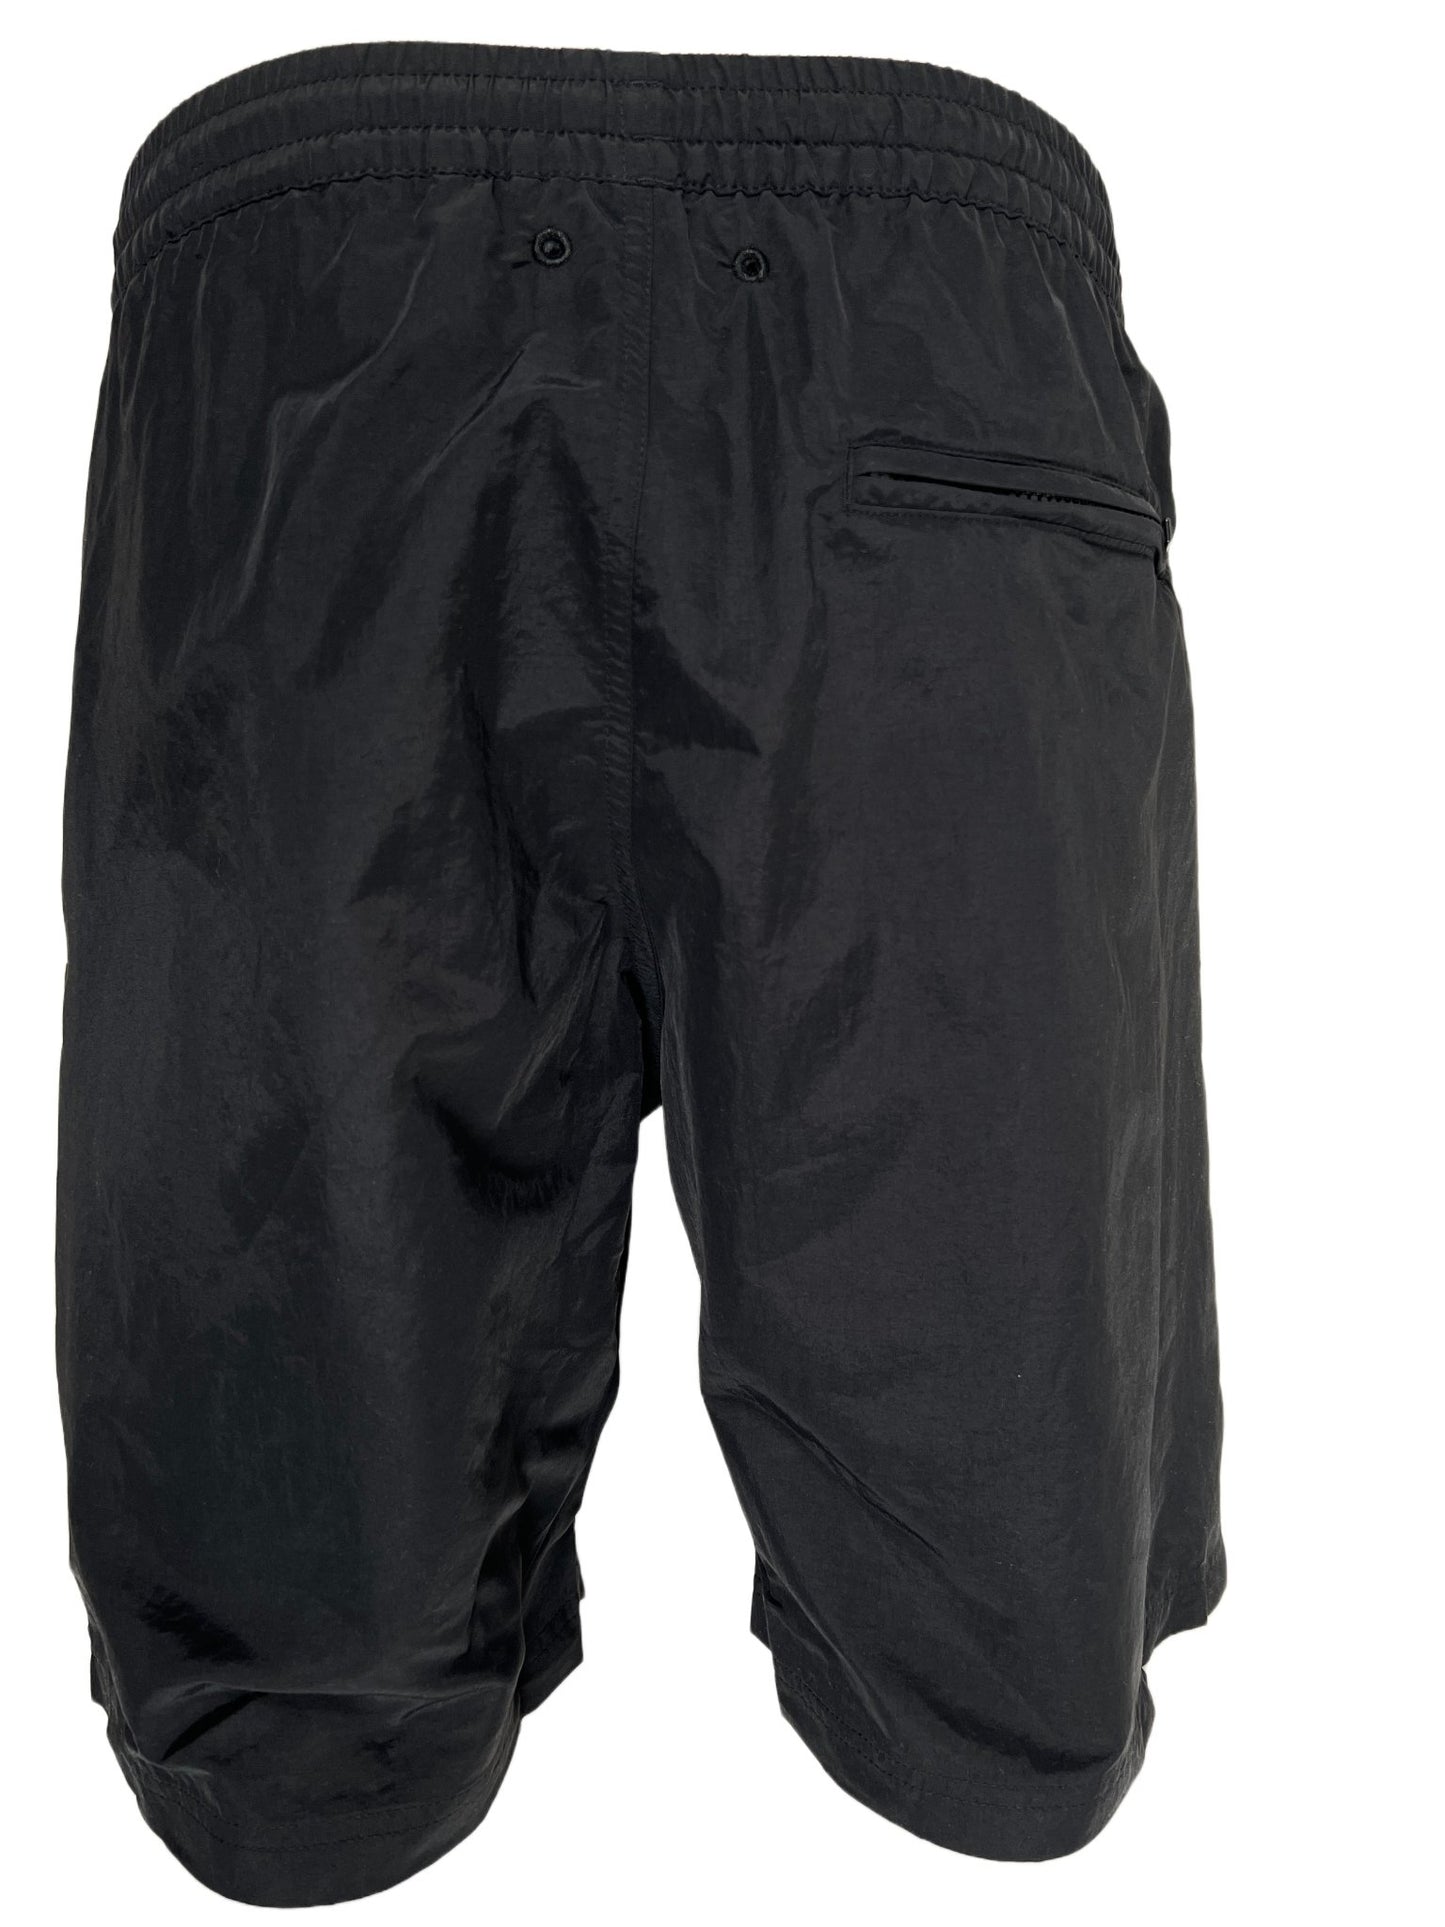 The back view of a black ADIDAS x Y-3 polyester swim shorts.